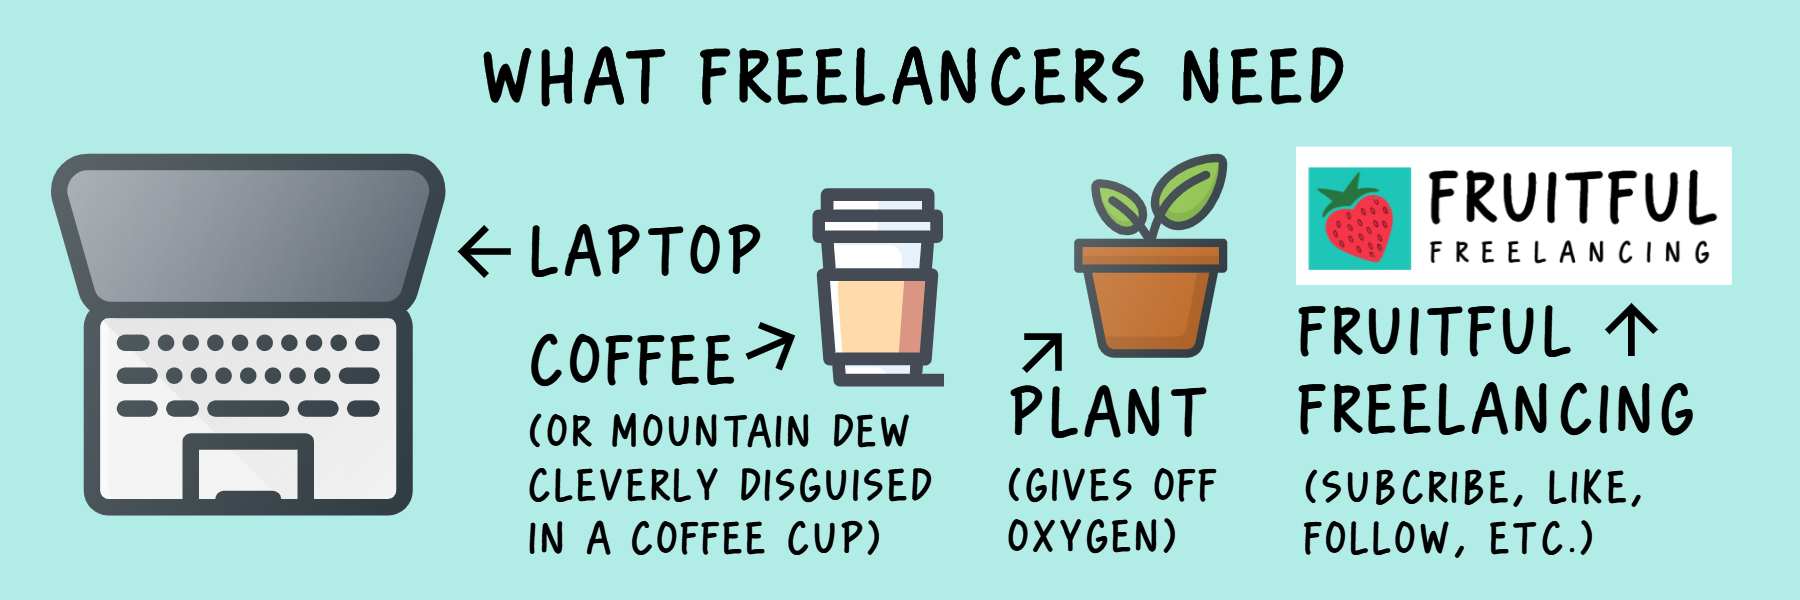 What Freelancers Need